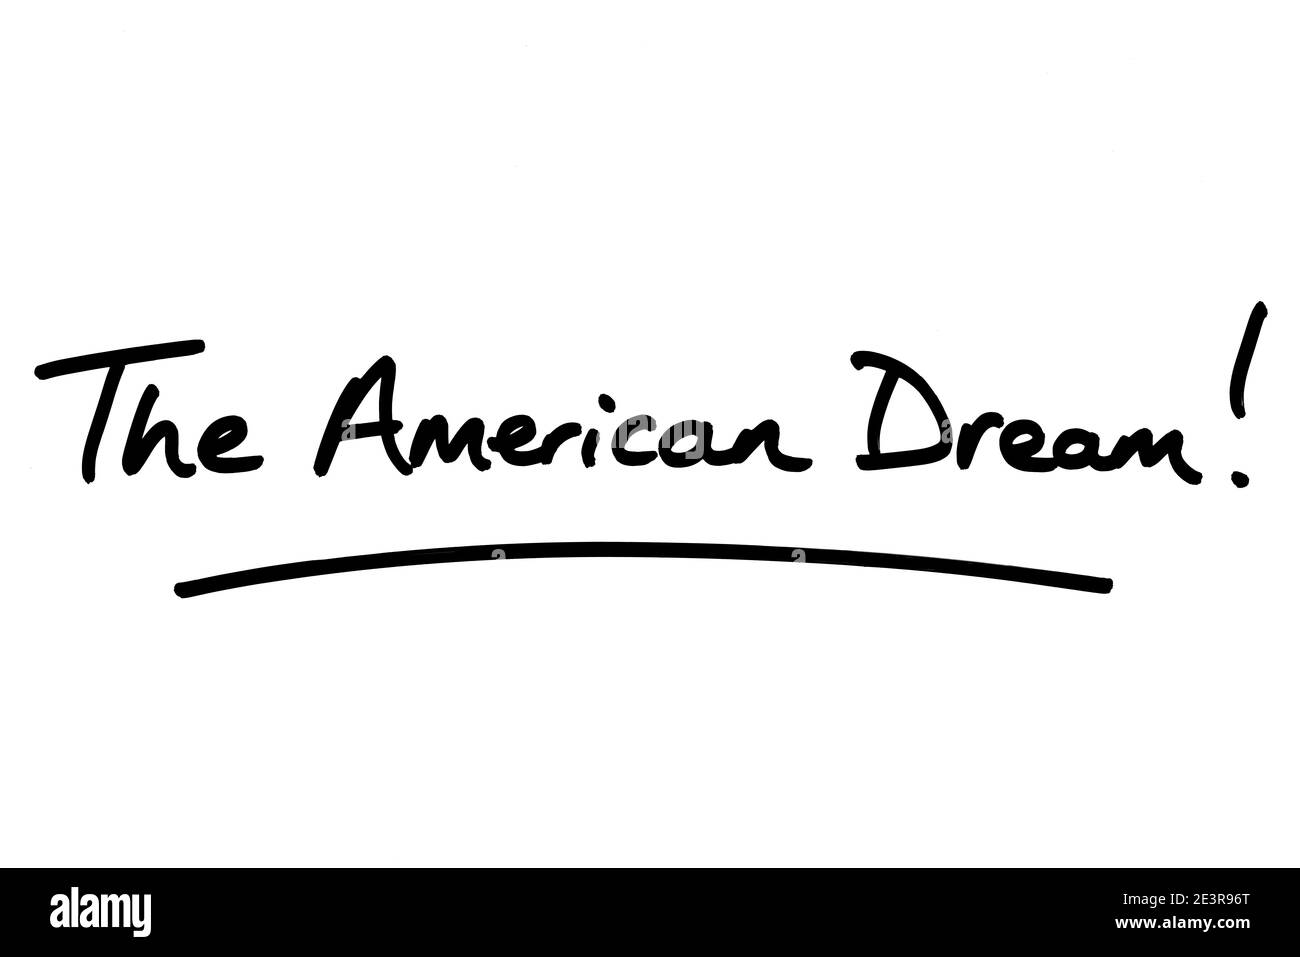 The American Dream! handwritten on a white background. Stock Photo